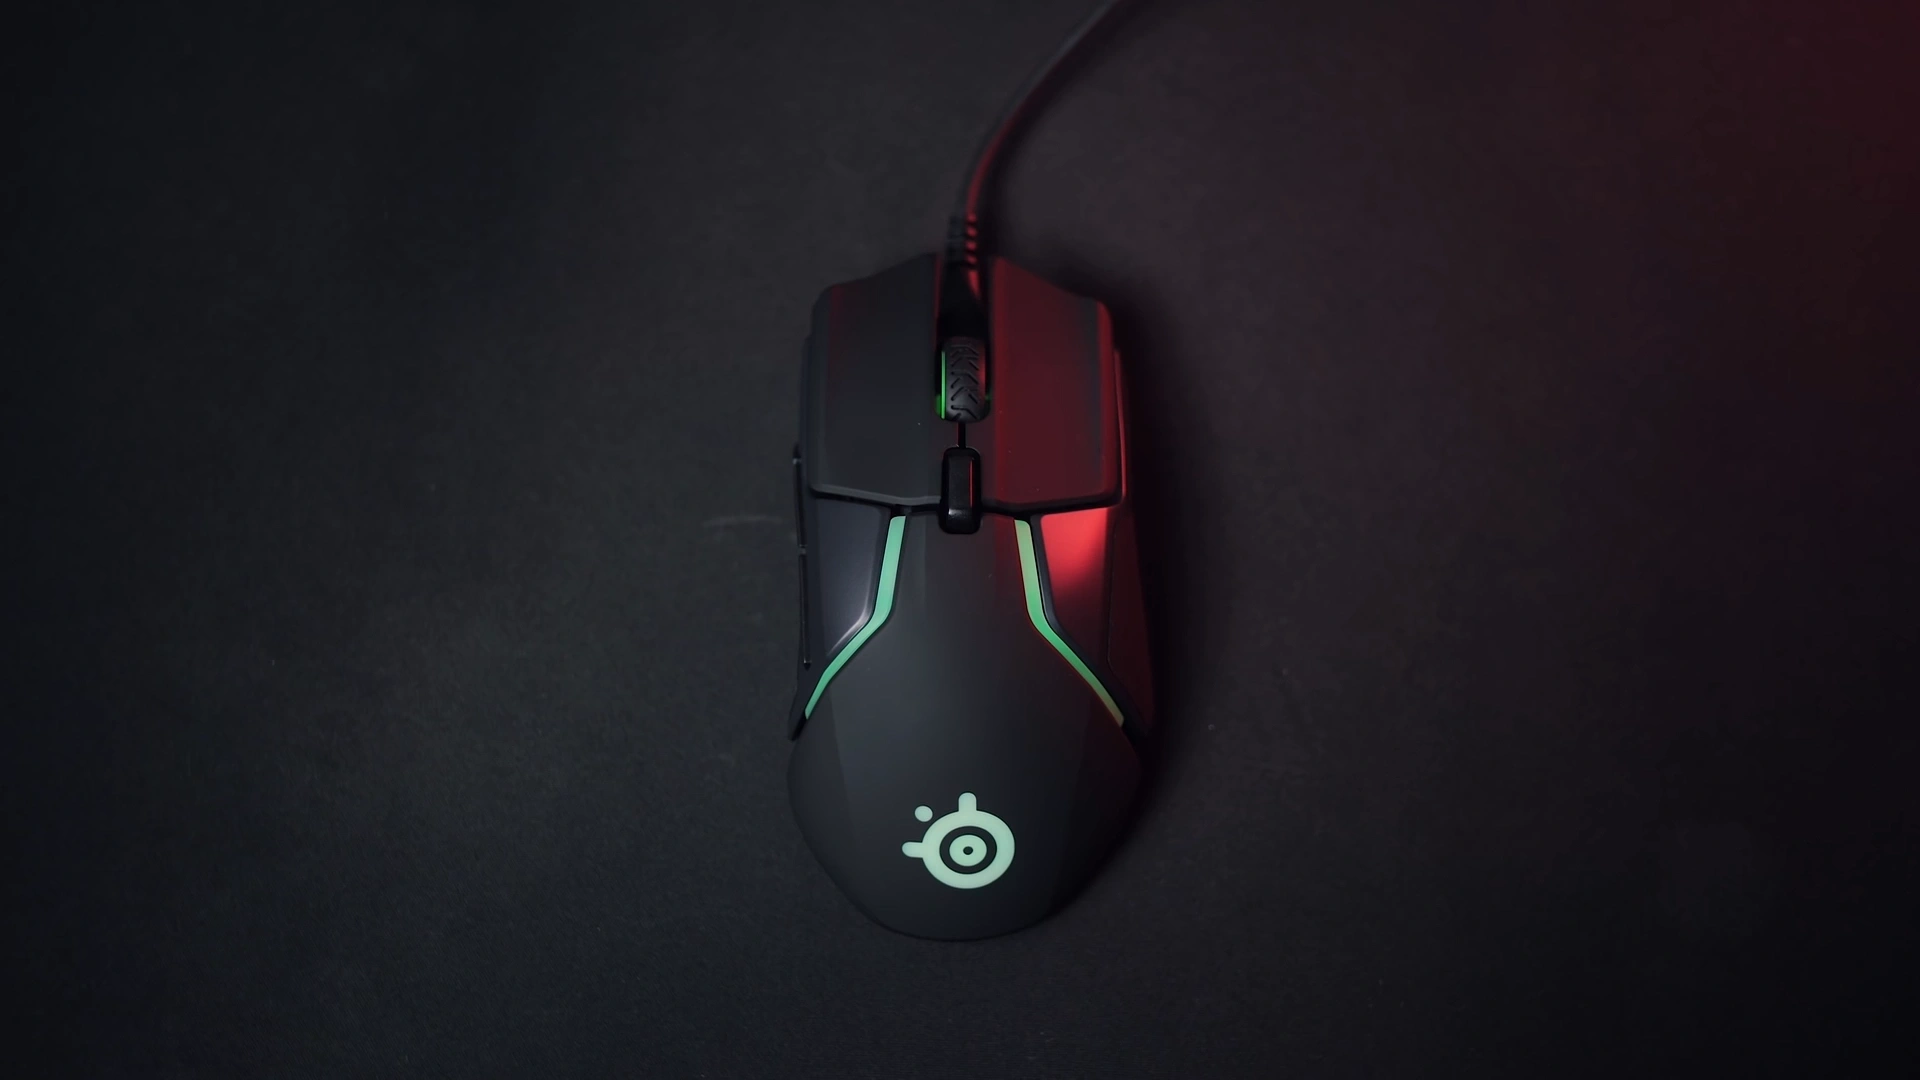 SteelSeries Rival 600 Wireless Mouse